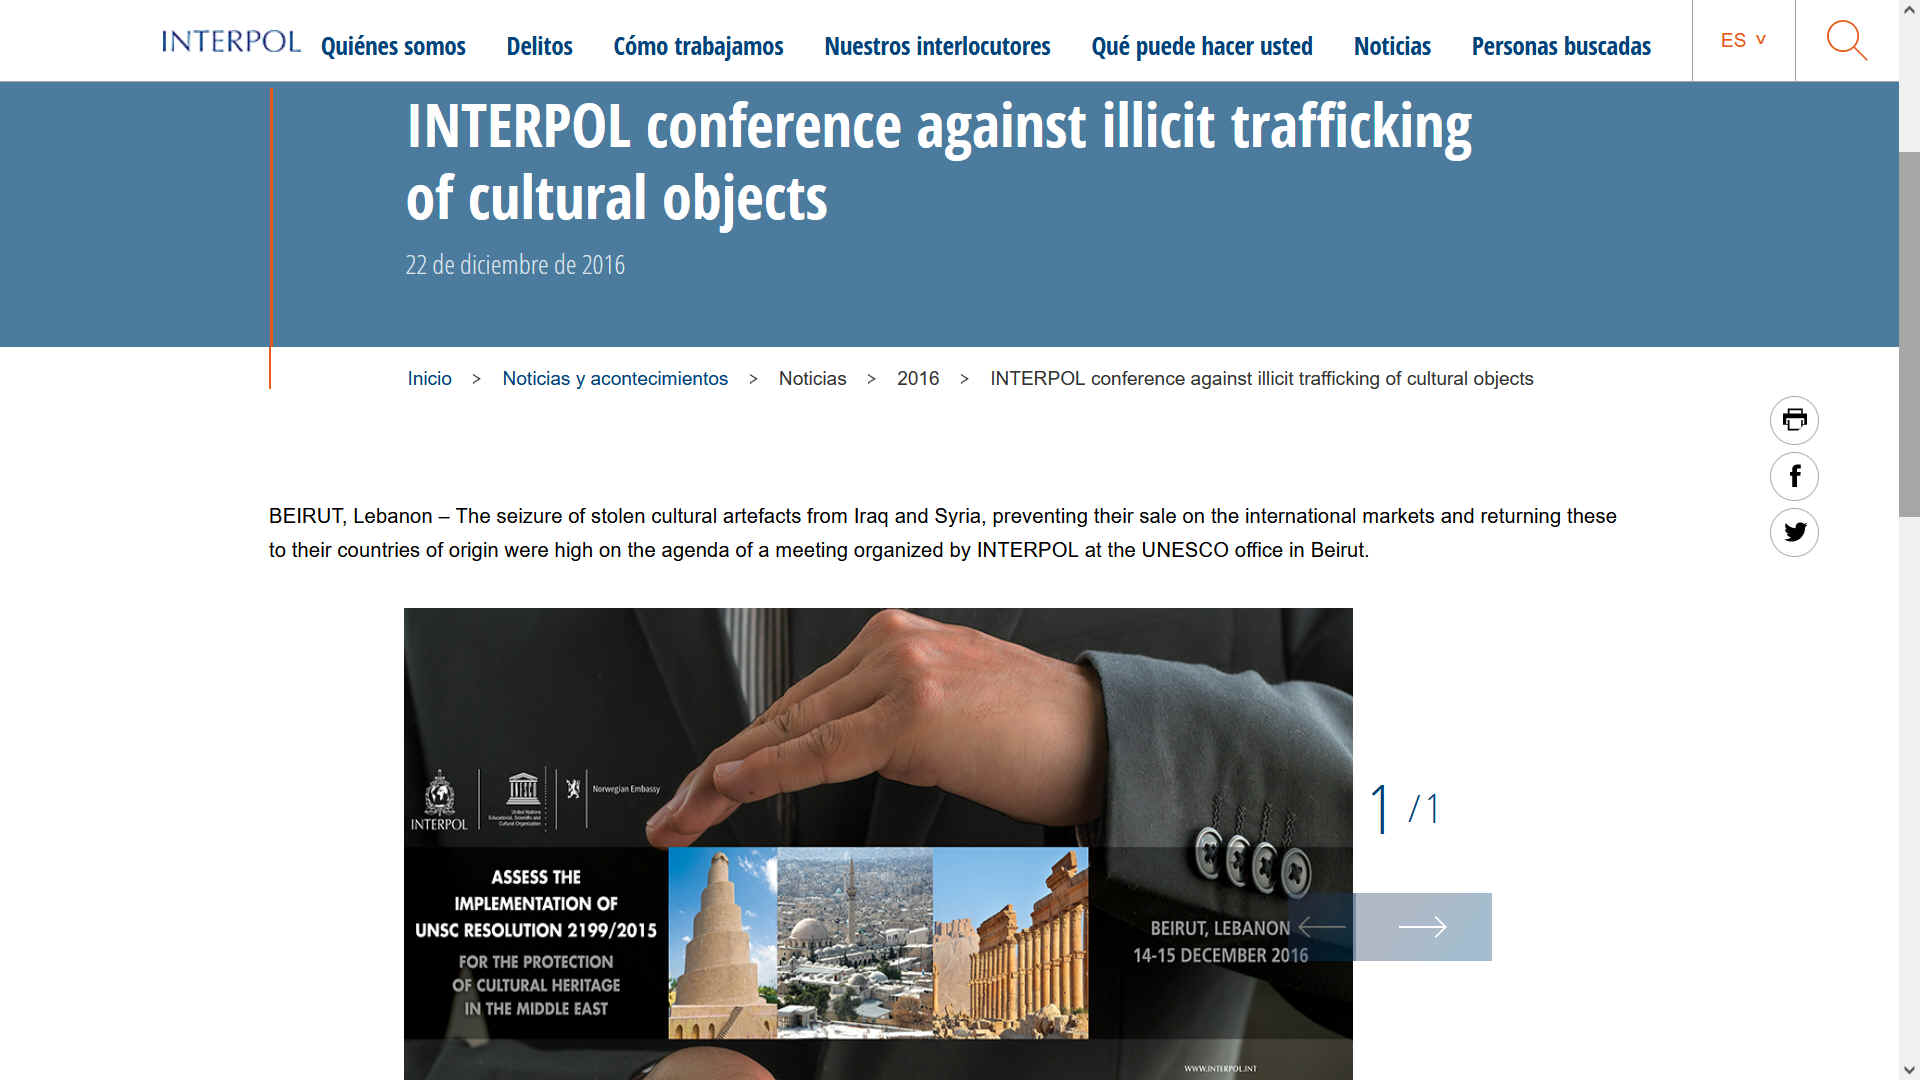 INTERPOL conference 2016 on the subject of international trafficking of cultural treasures